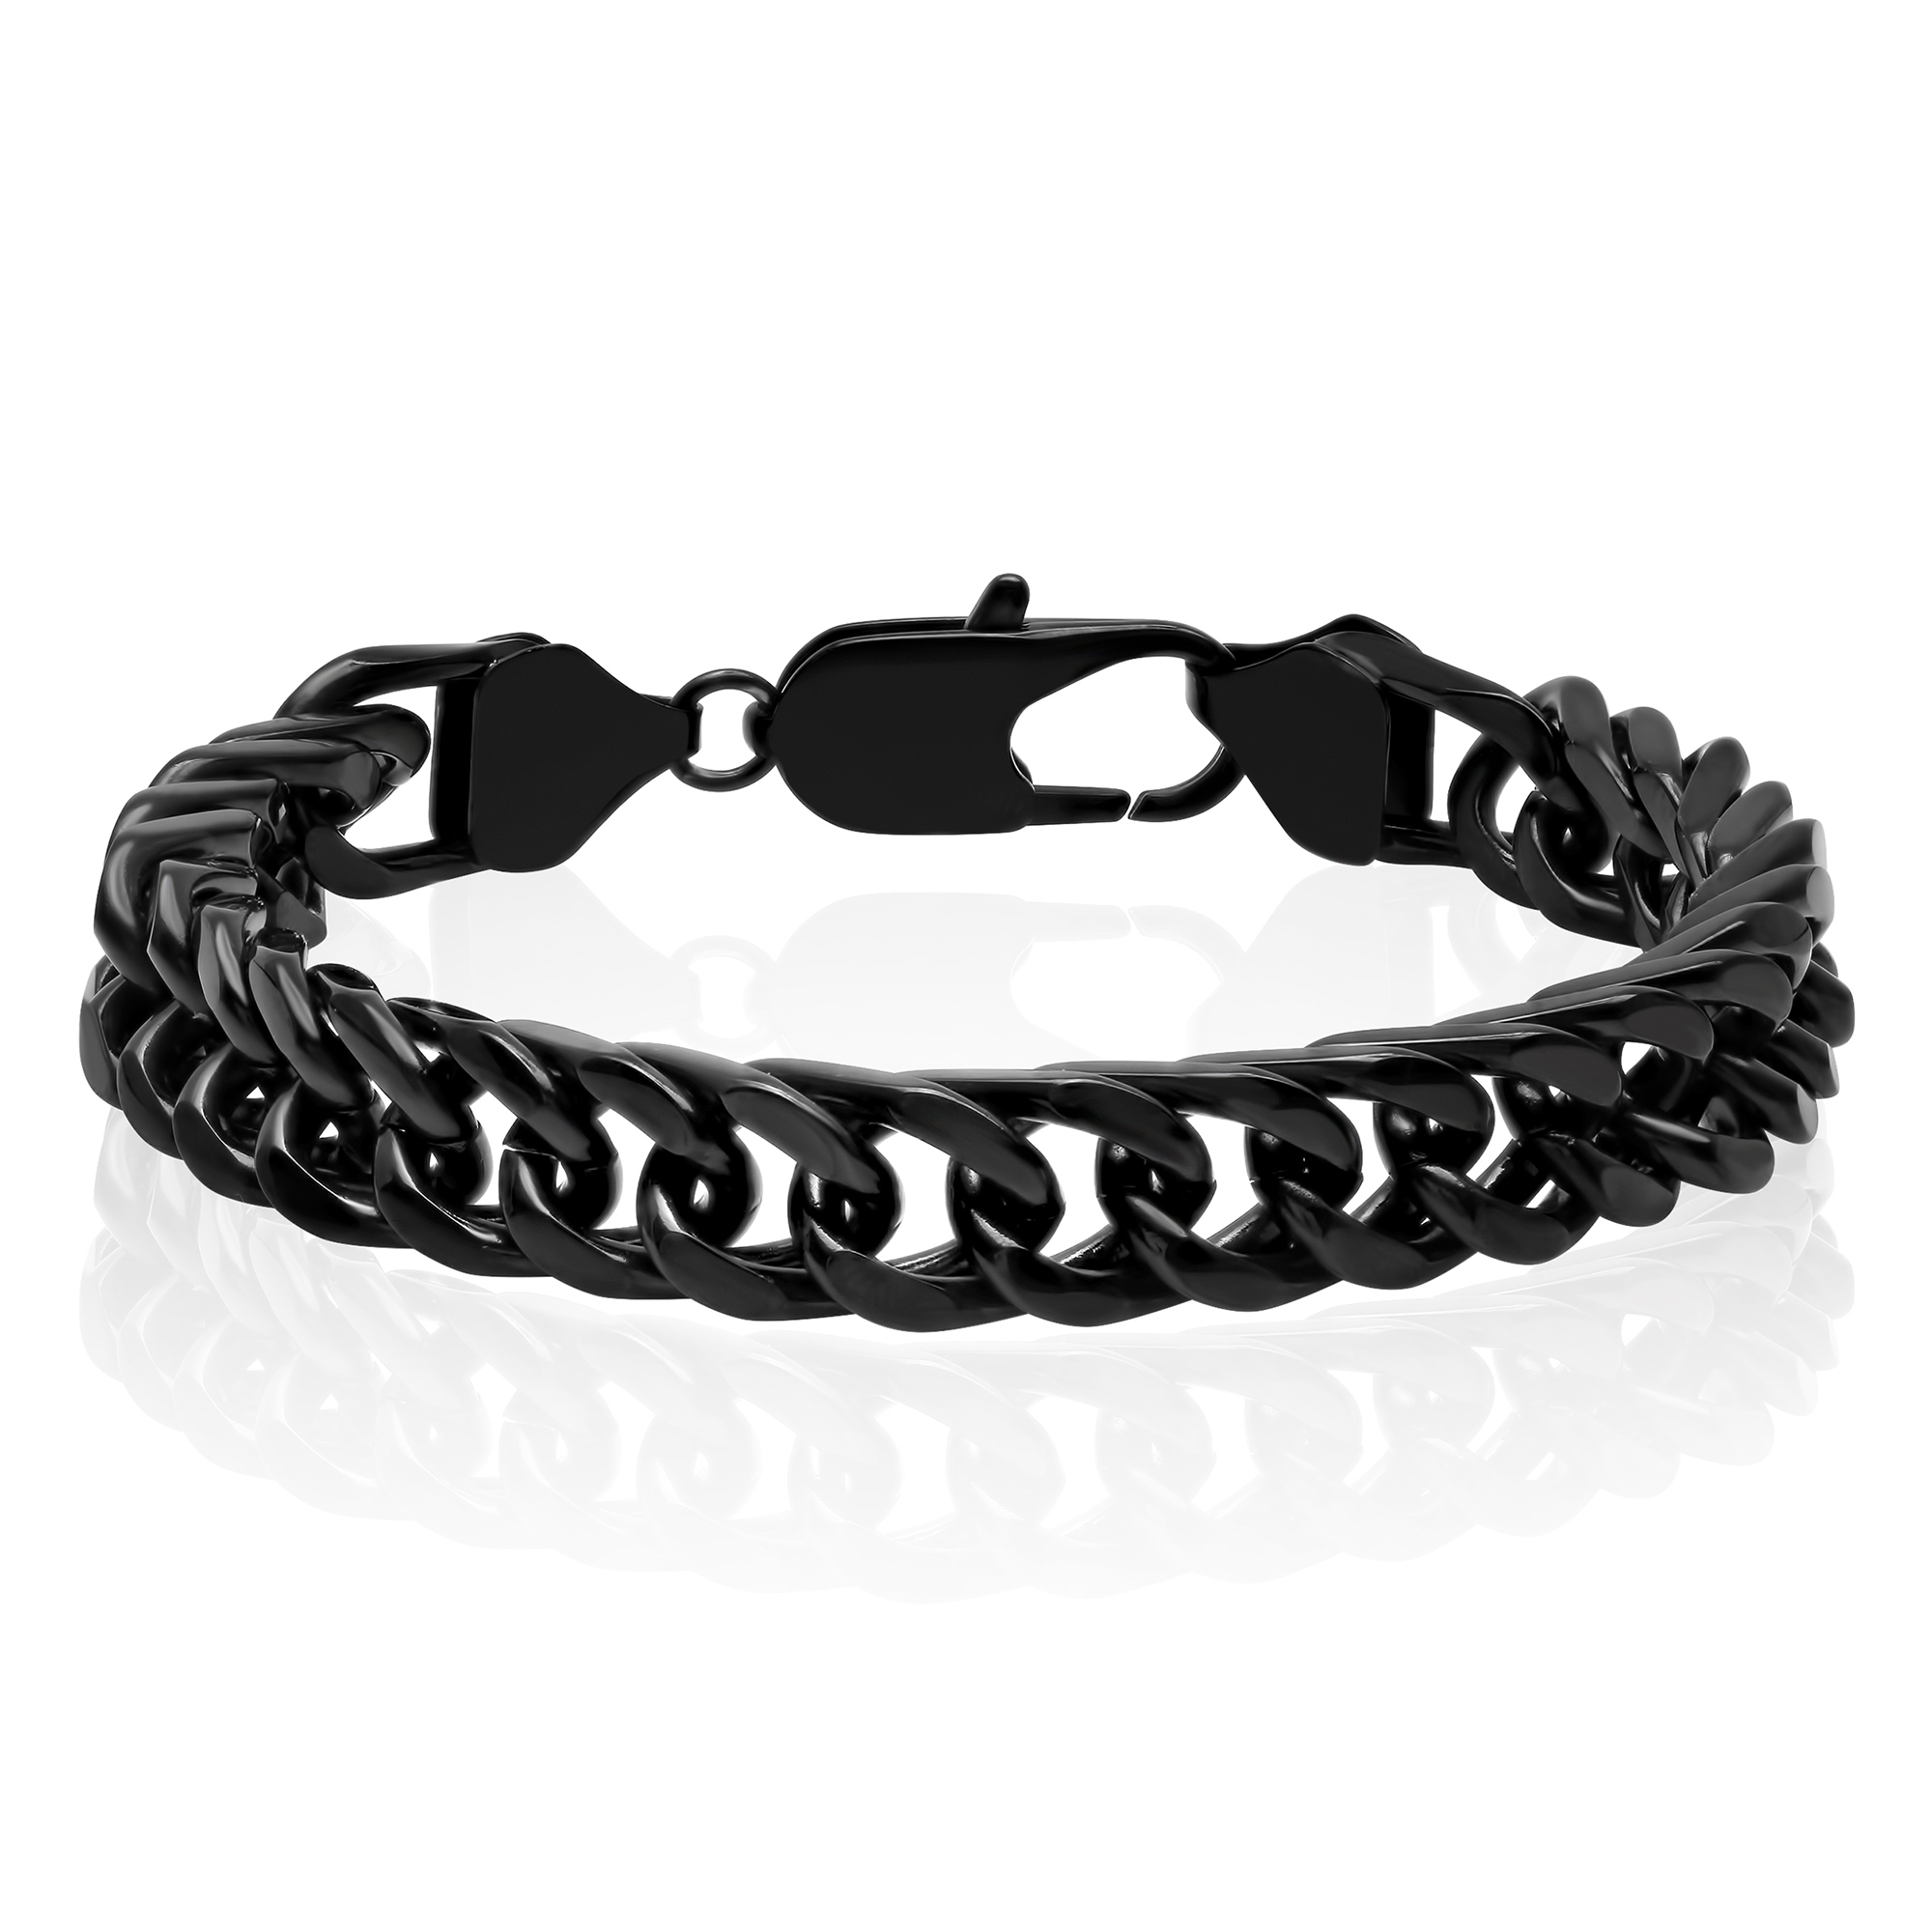 Men's 11.0mm Curb Chain Bracelet in Stainless Steel and Black IP - 9.0